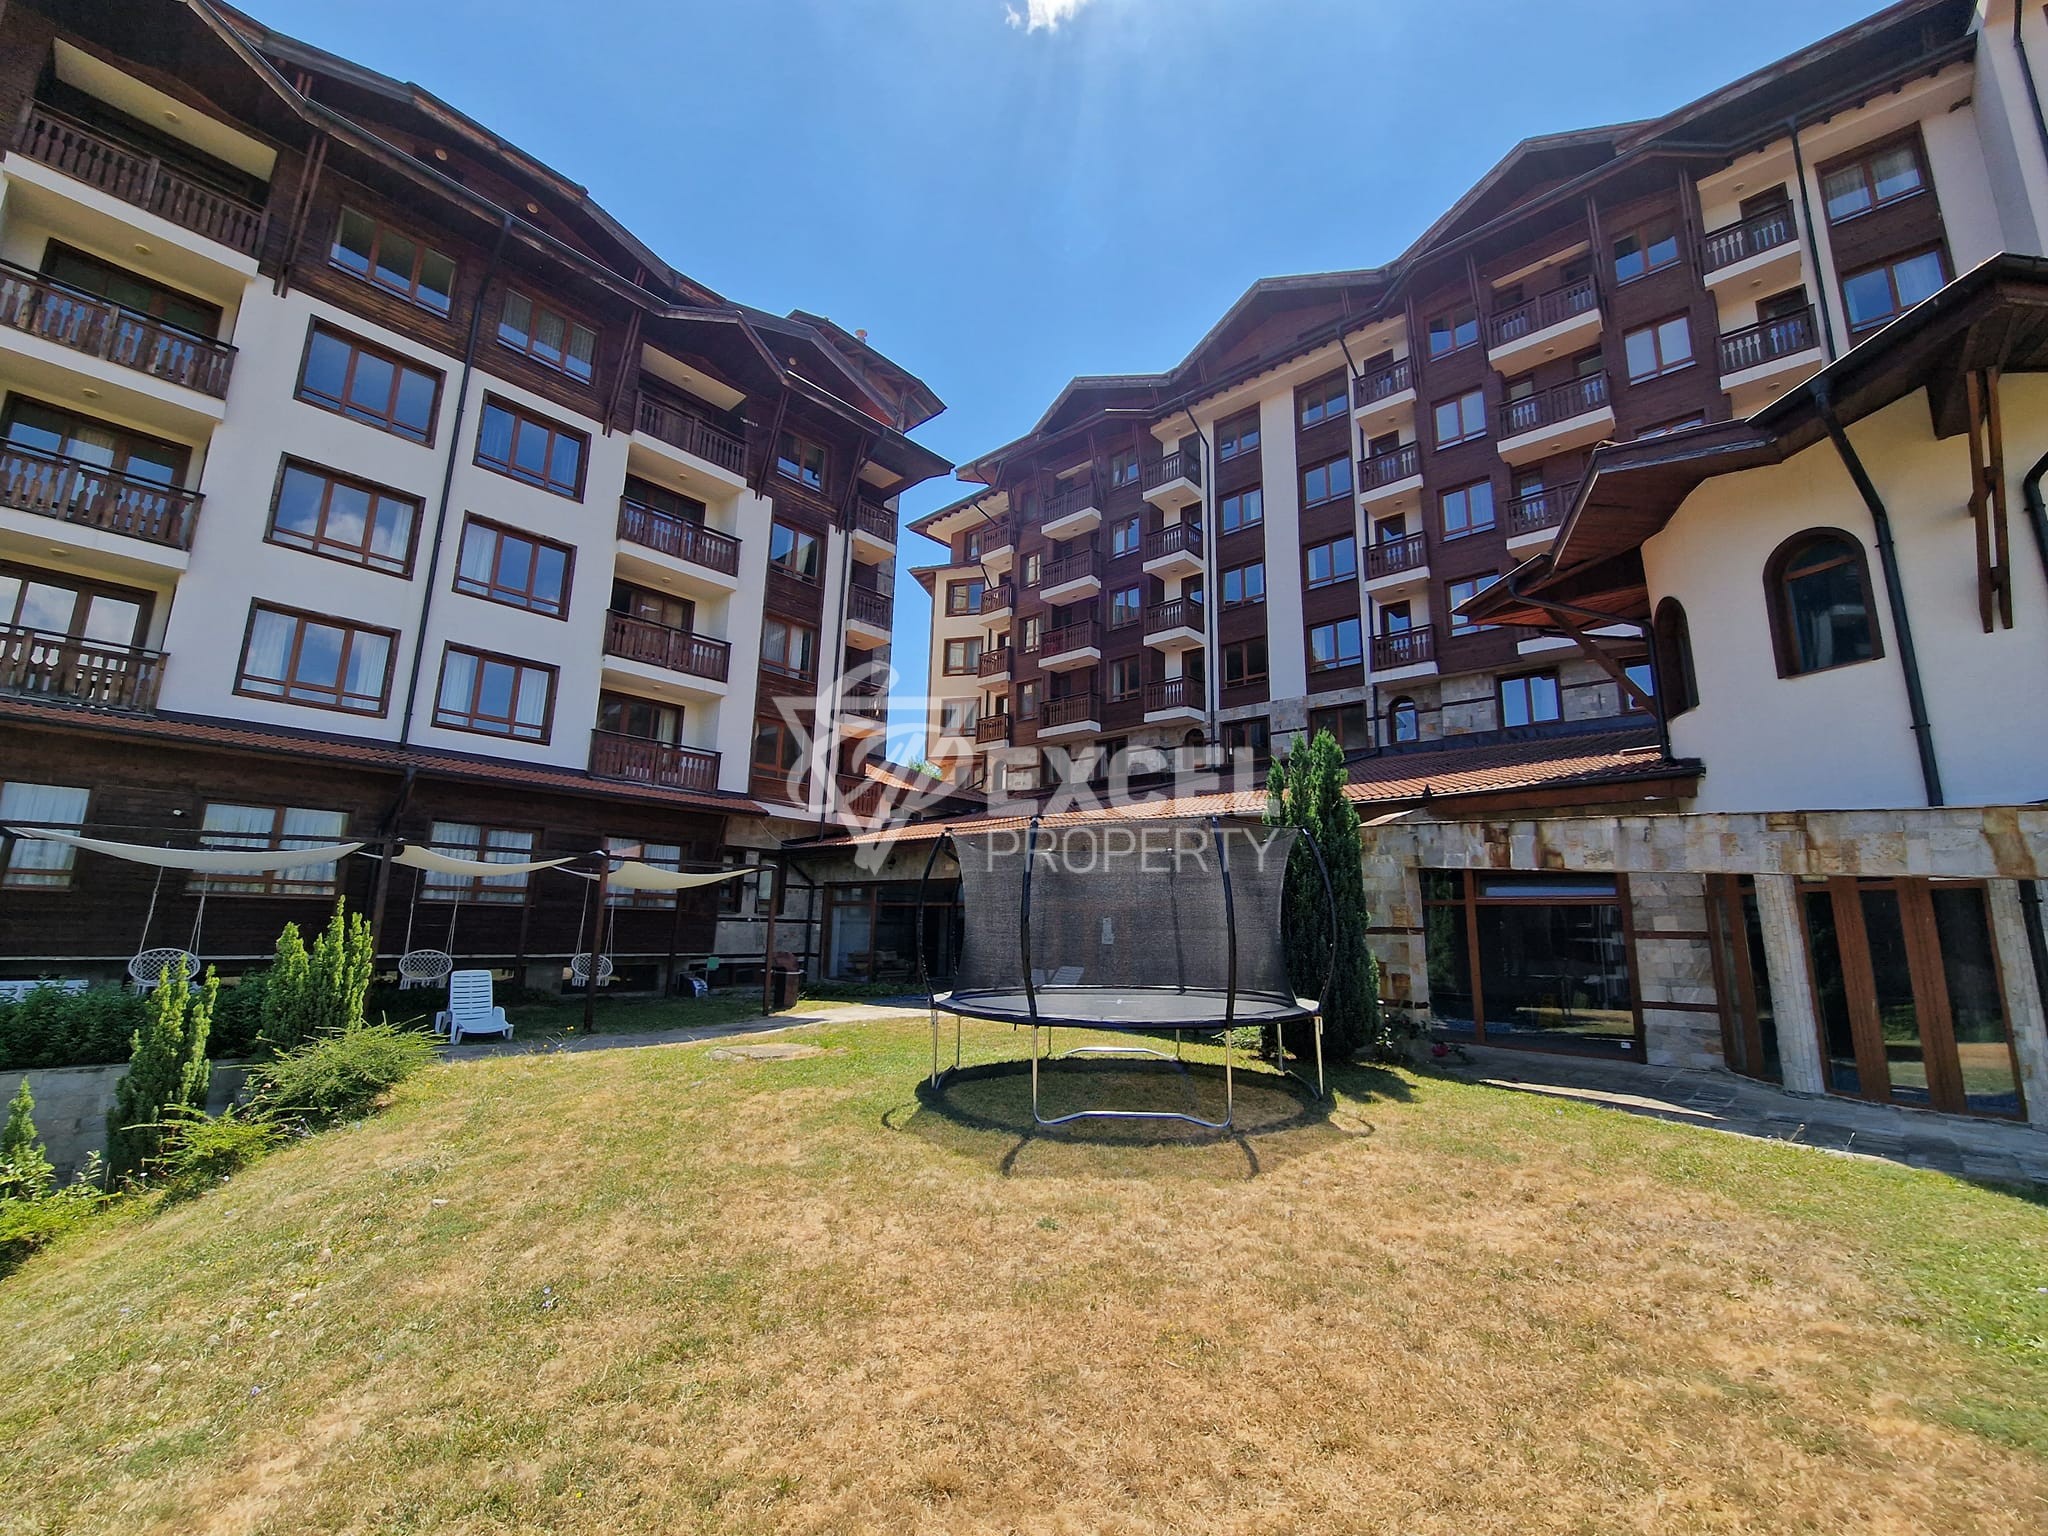 Furnished studio with terrace and beautiful views of the Ivan Rilski complex in Bansko